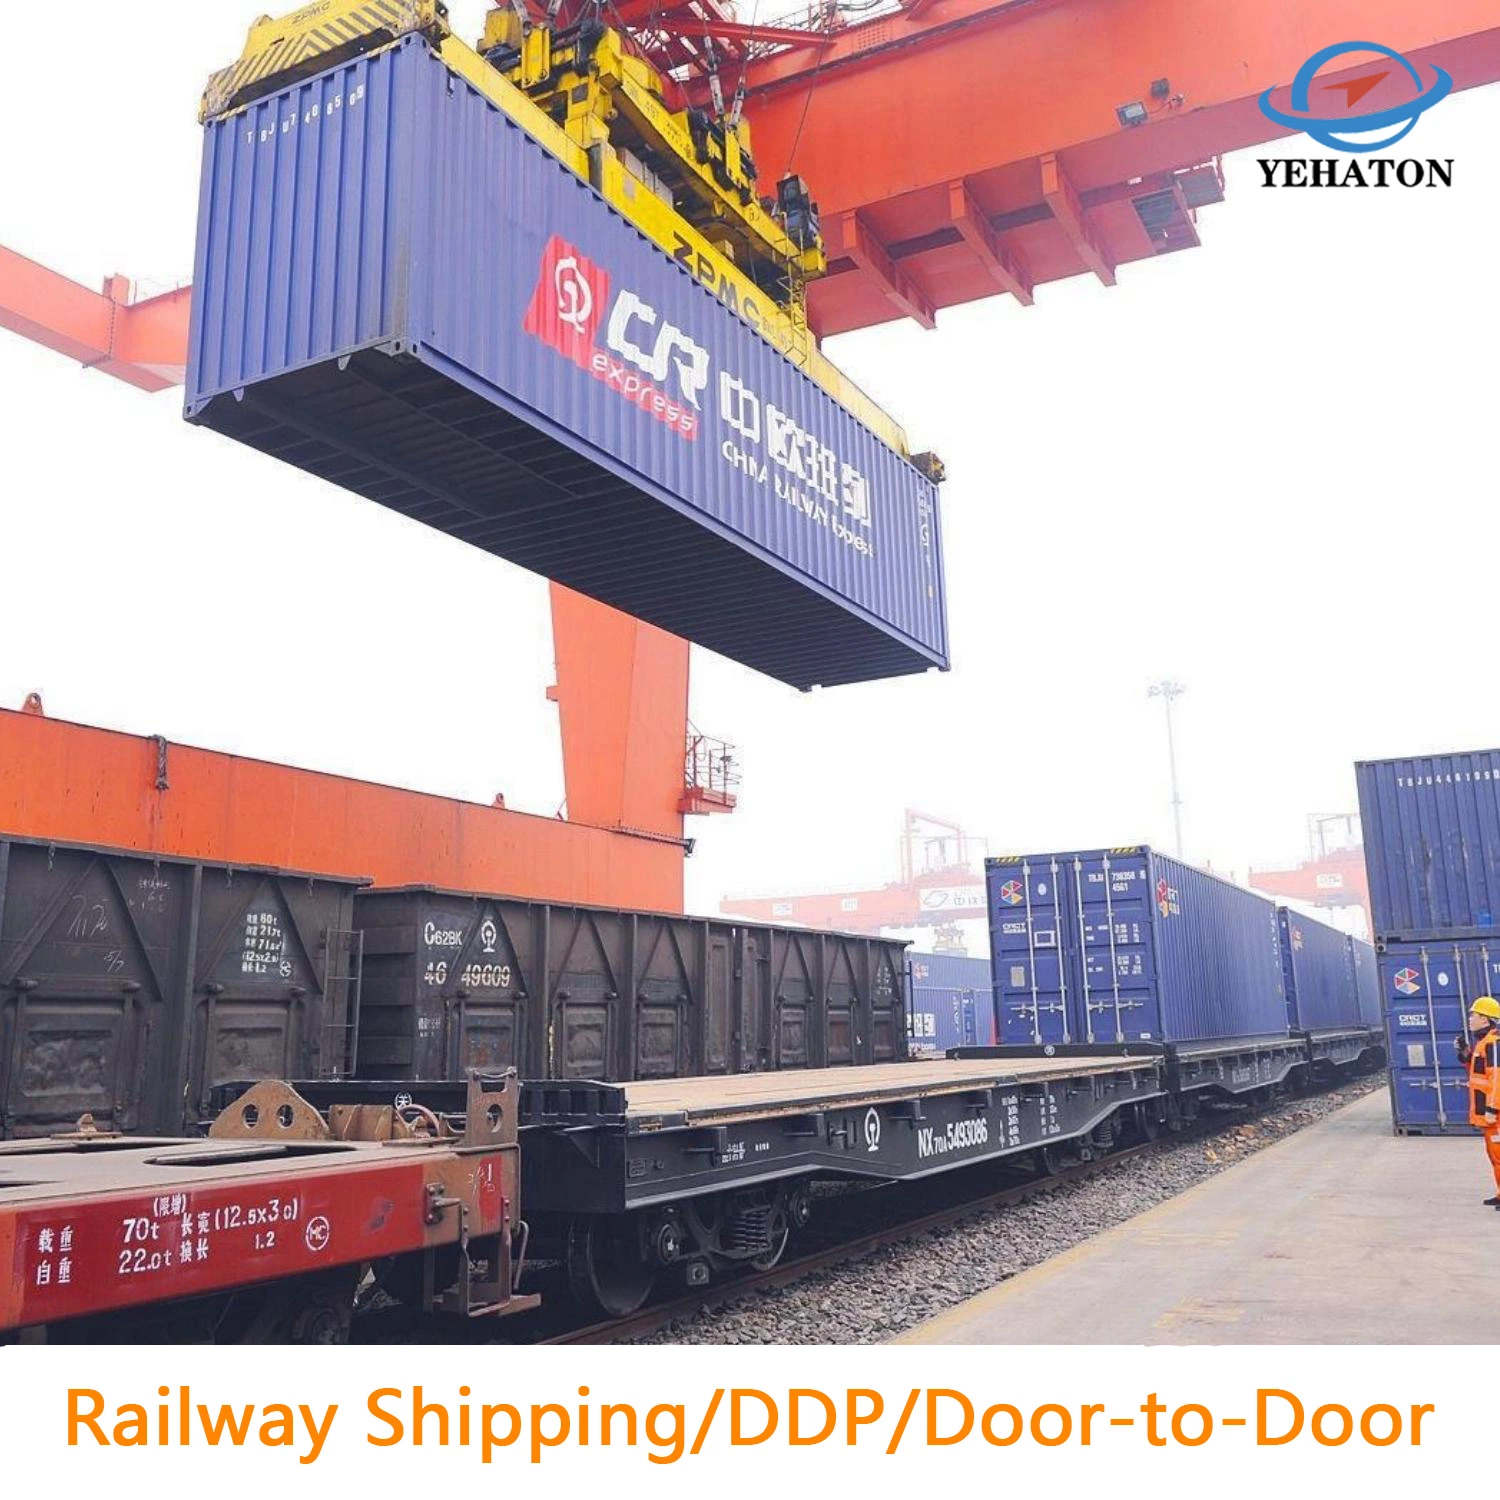 Low Air Cargo Ship Price Guangzhou Shenzhen Warehouse Service Truck Raliway Road Sea Logistics, Alibaba Express Delivery Drop Shipping Agent Freight Forwarder